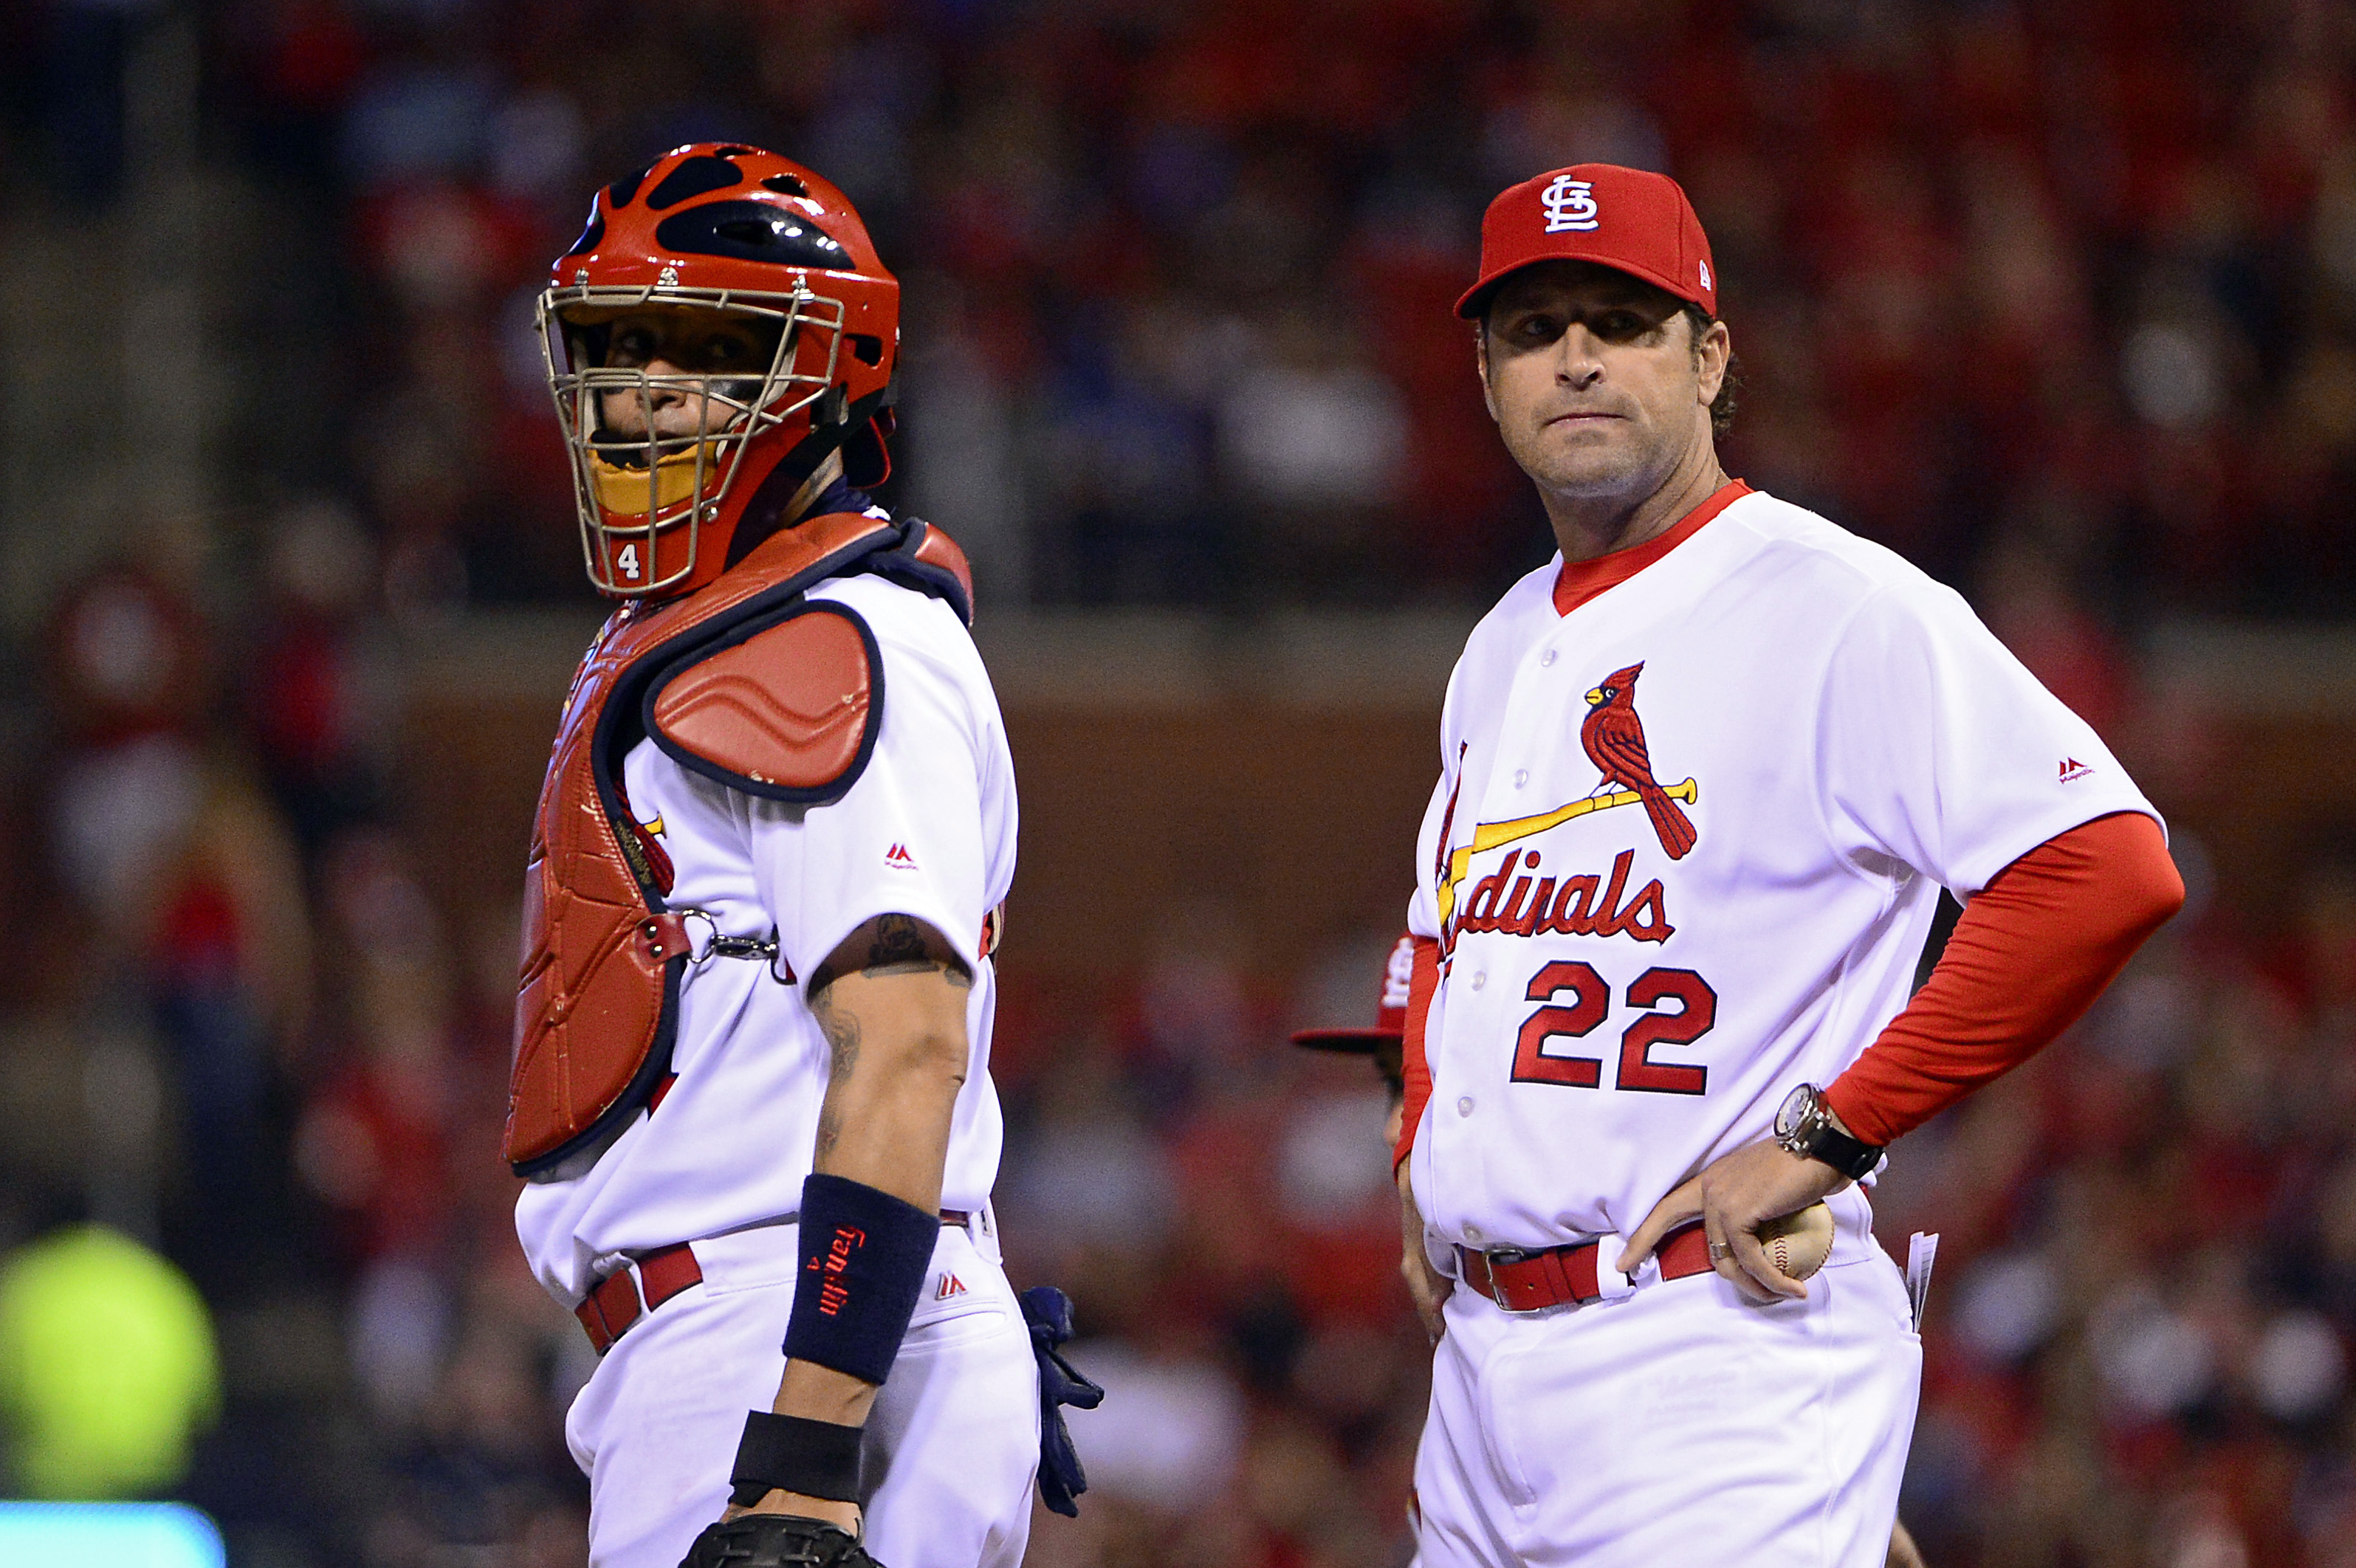 Yadier Molina isn't one of the most valuable players in baseball